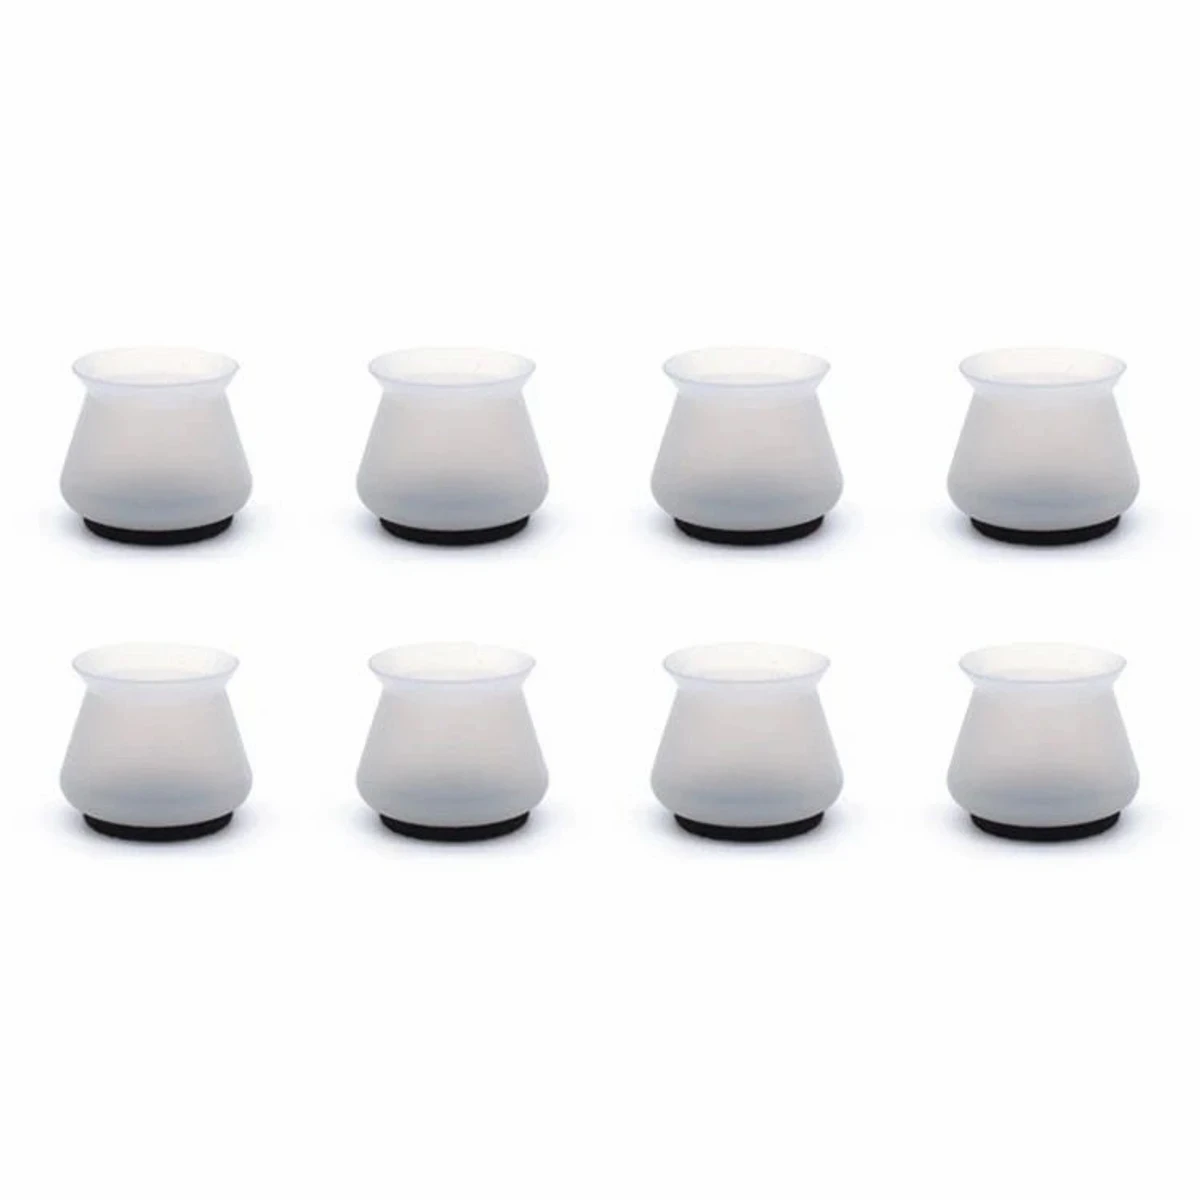 24 Pcs Silicone chair legs Protective cover